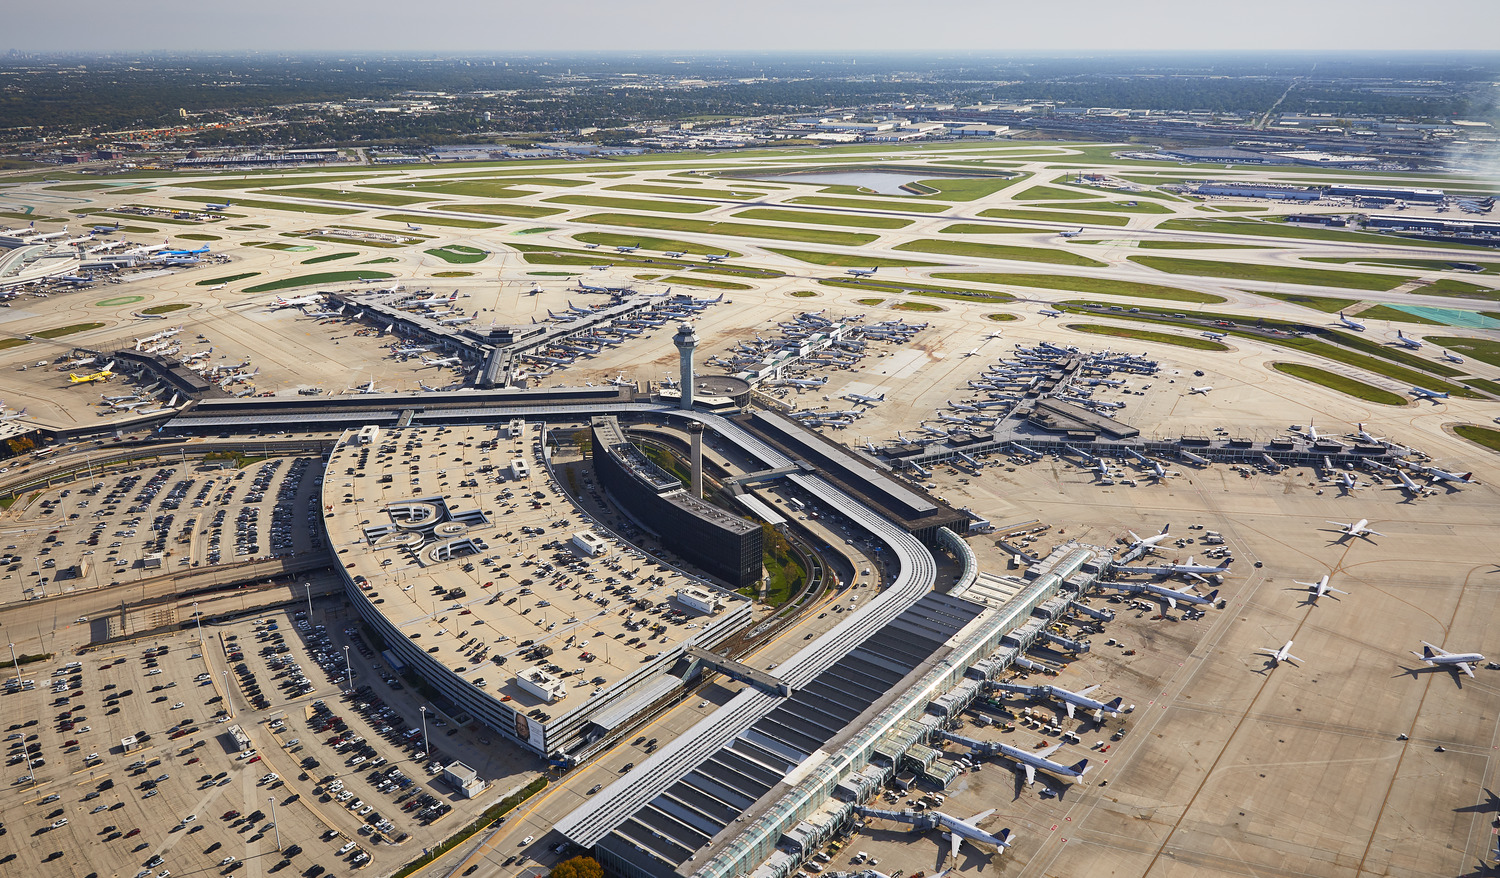 Aerial view of a busy airport with multiple runways and parked aircraft.